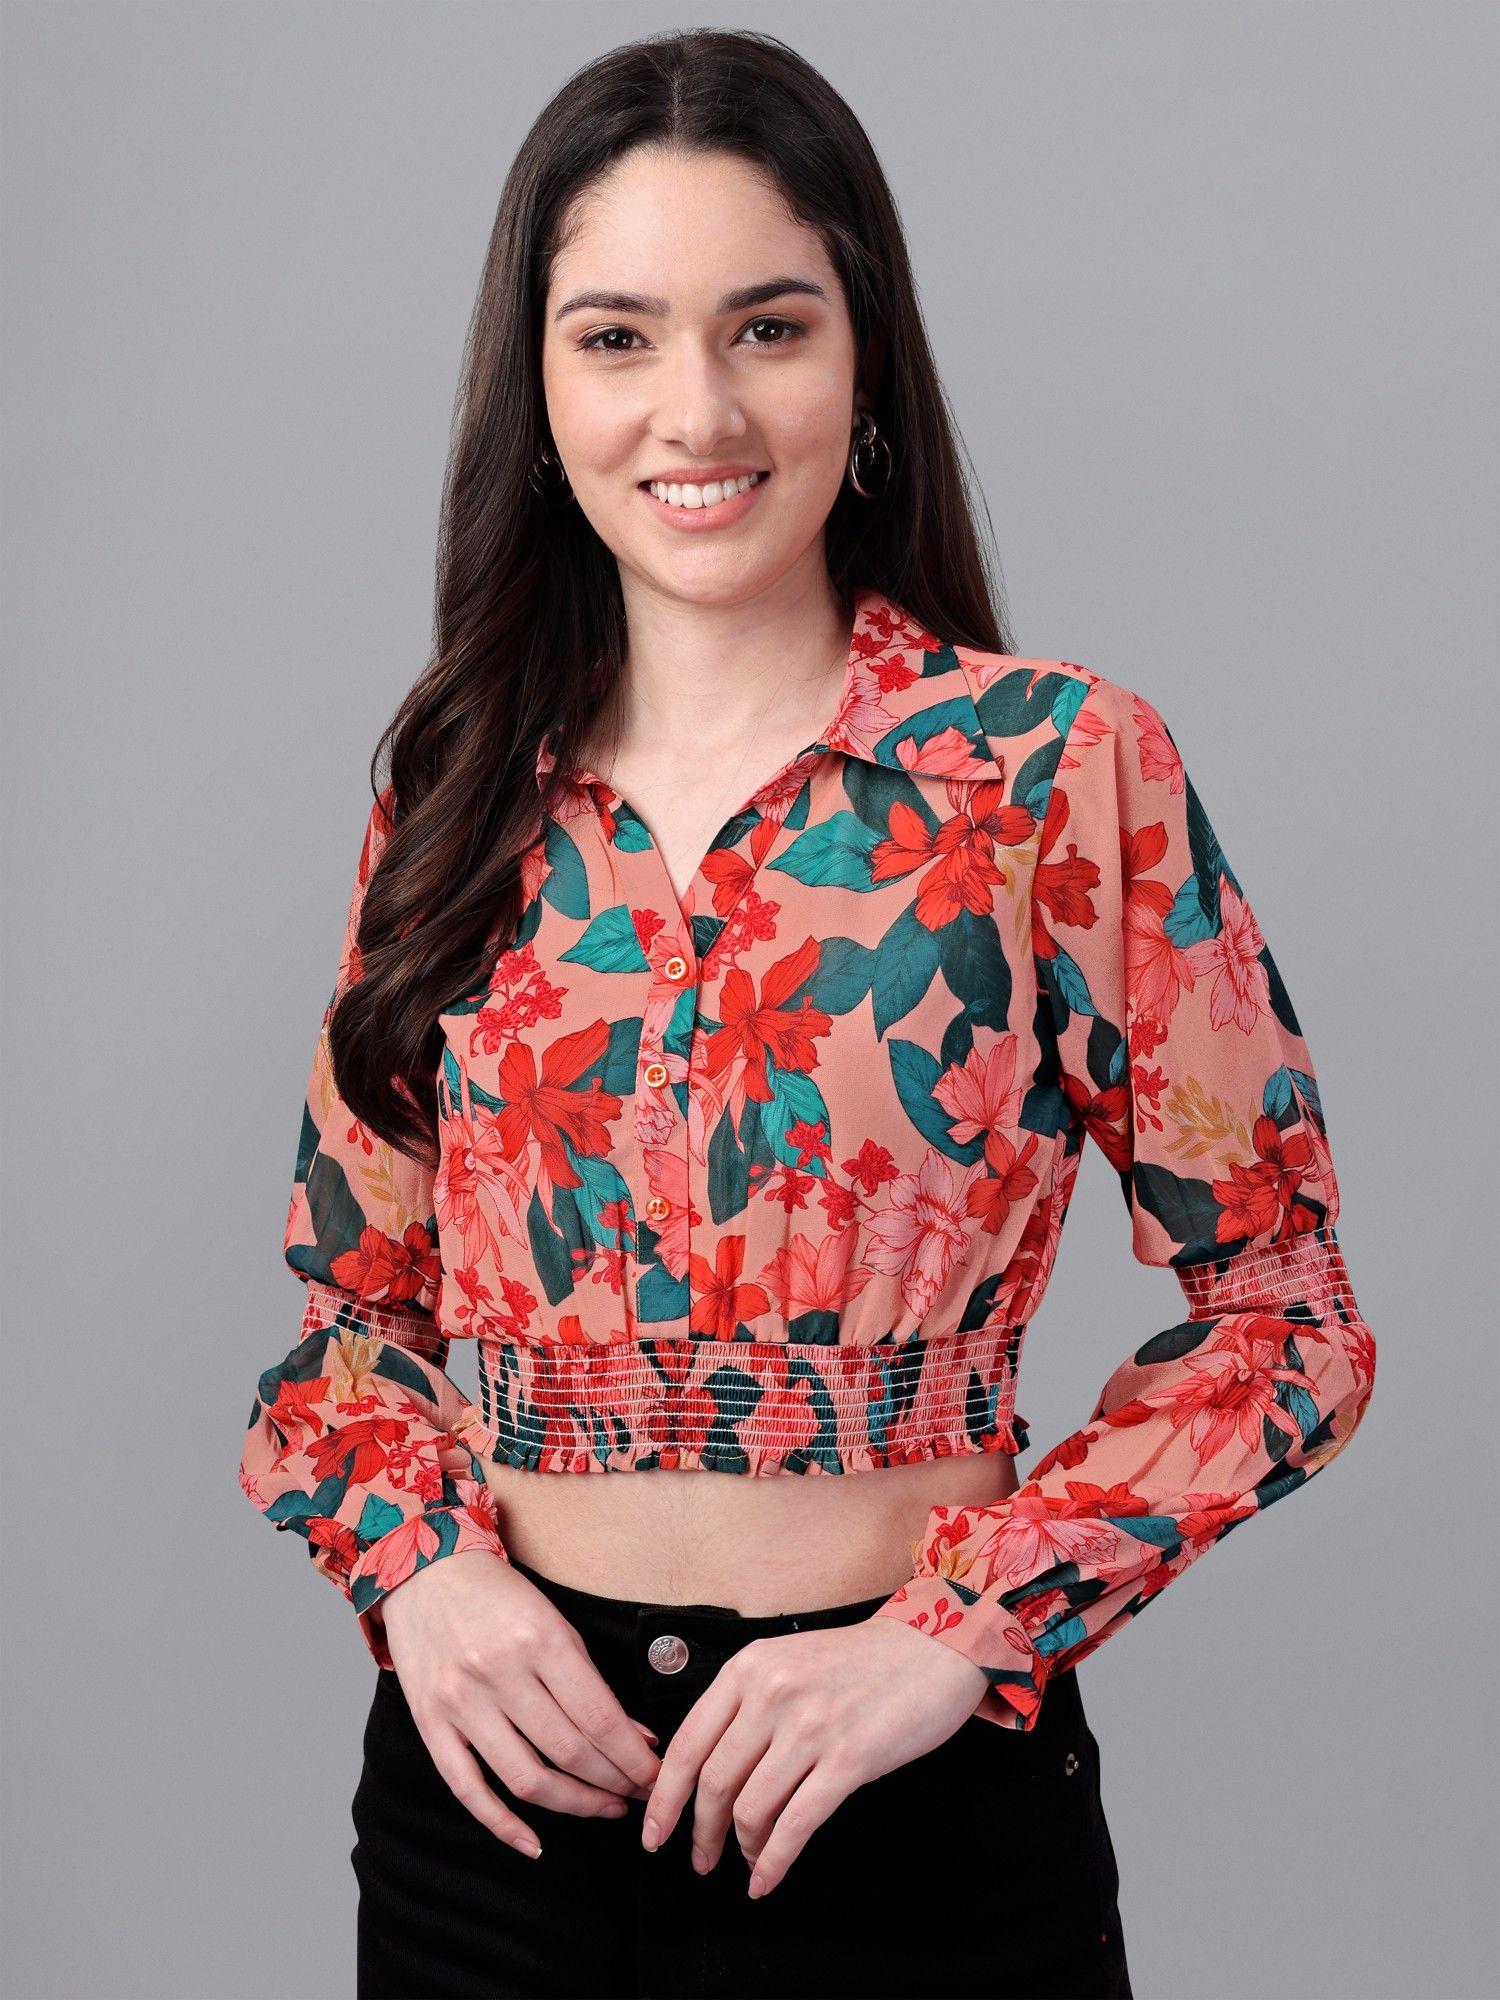 women floral printed shirt style crop top